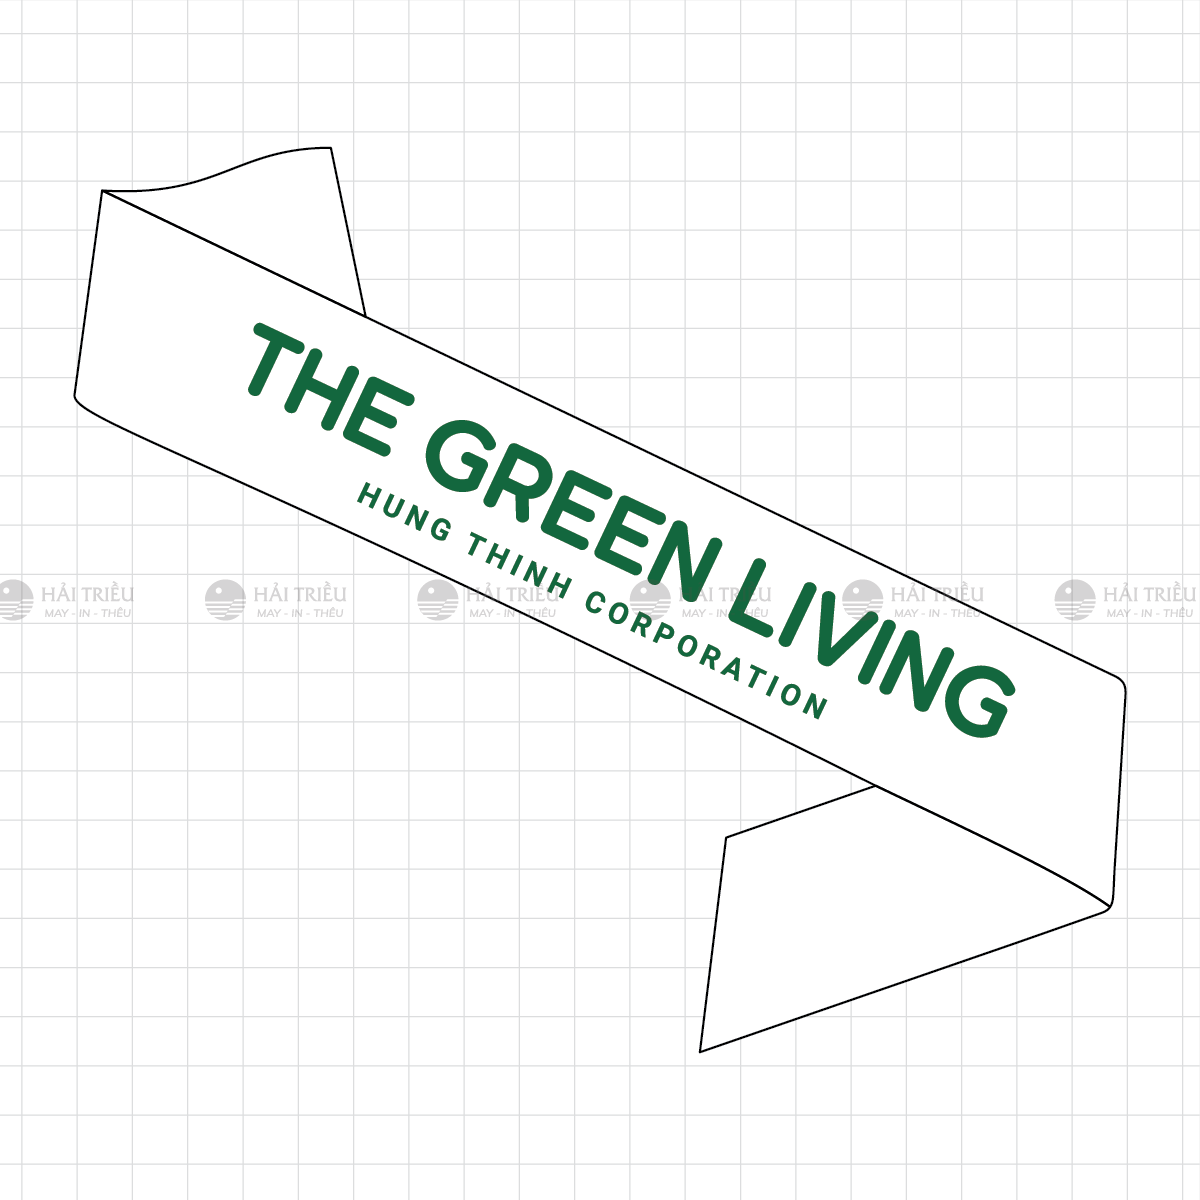 bang deo cheo the green living hung thinh corporation